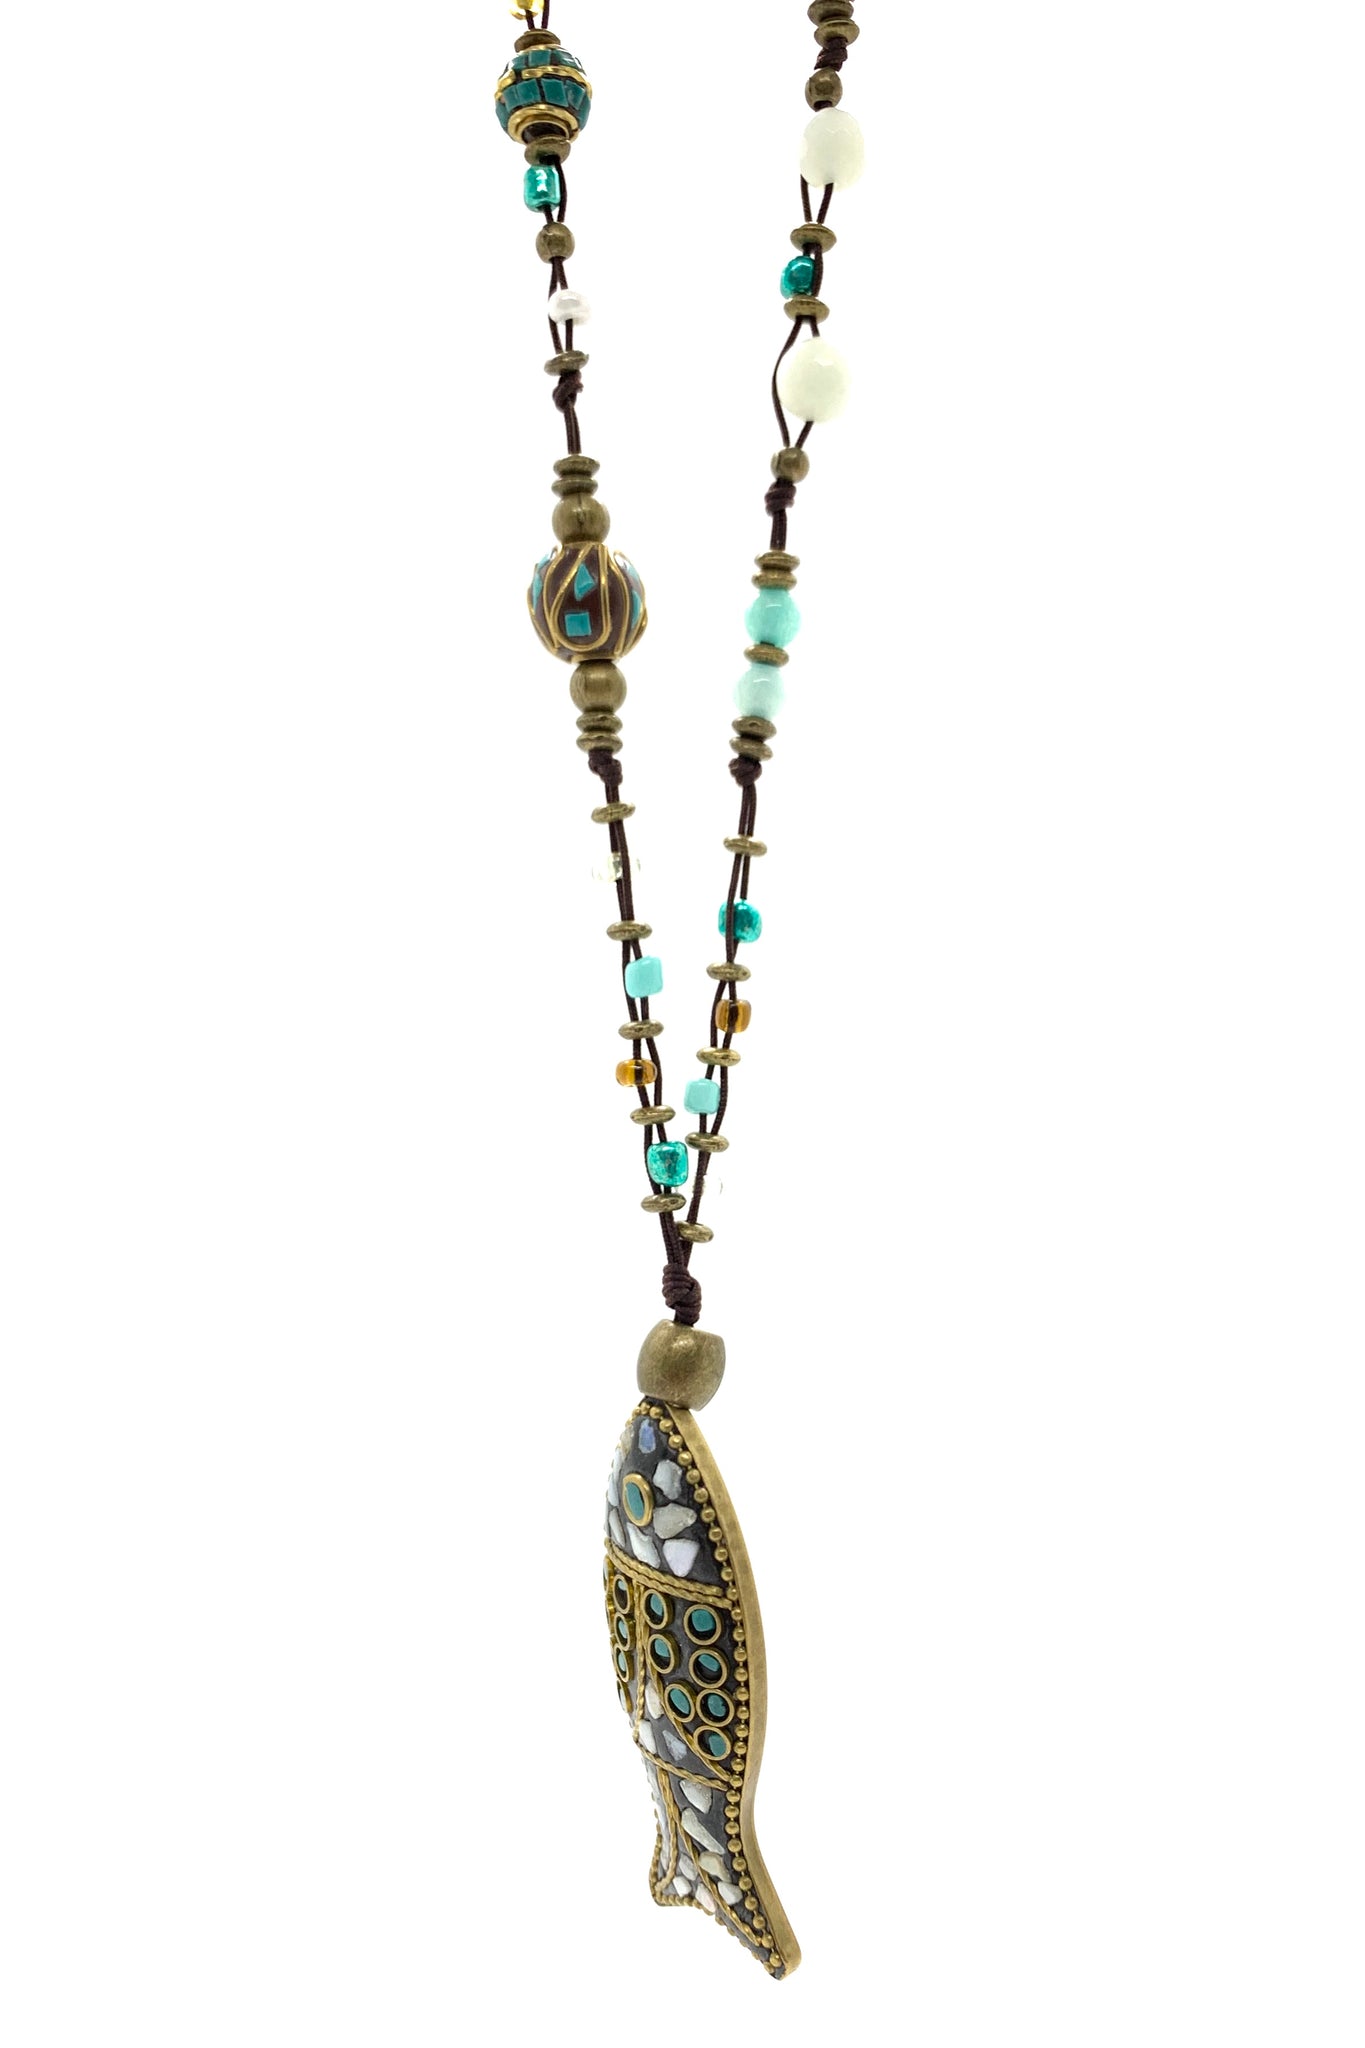 Long necklace with fish pendant